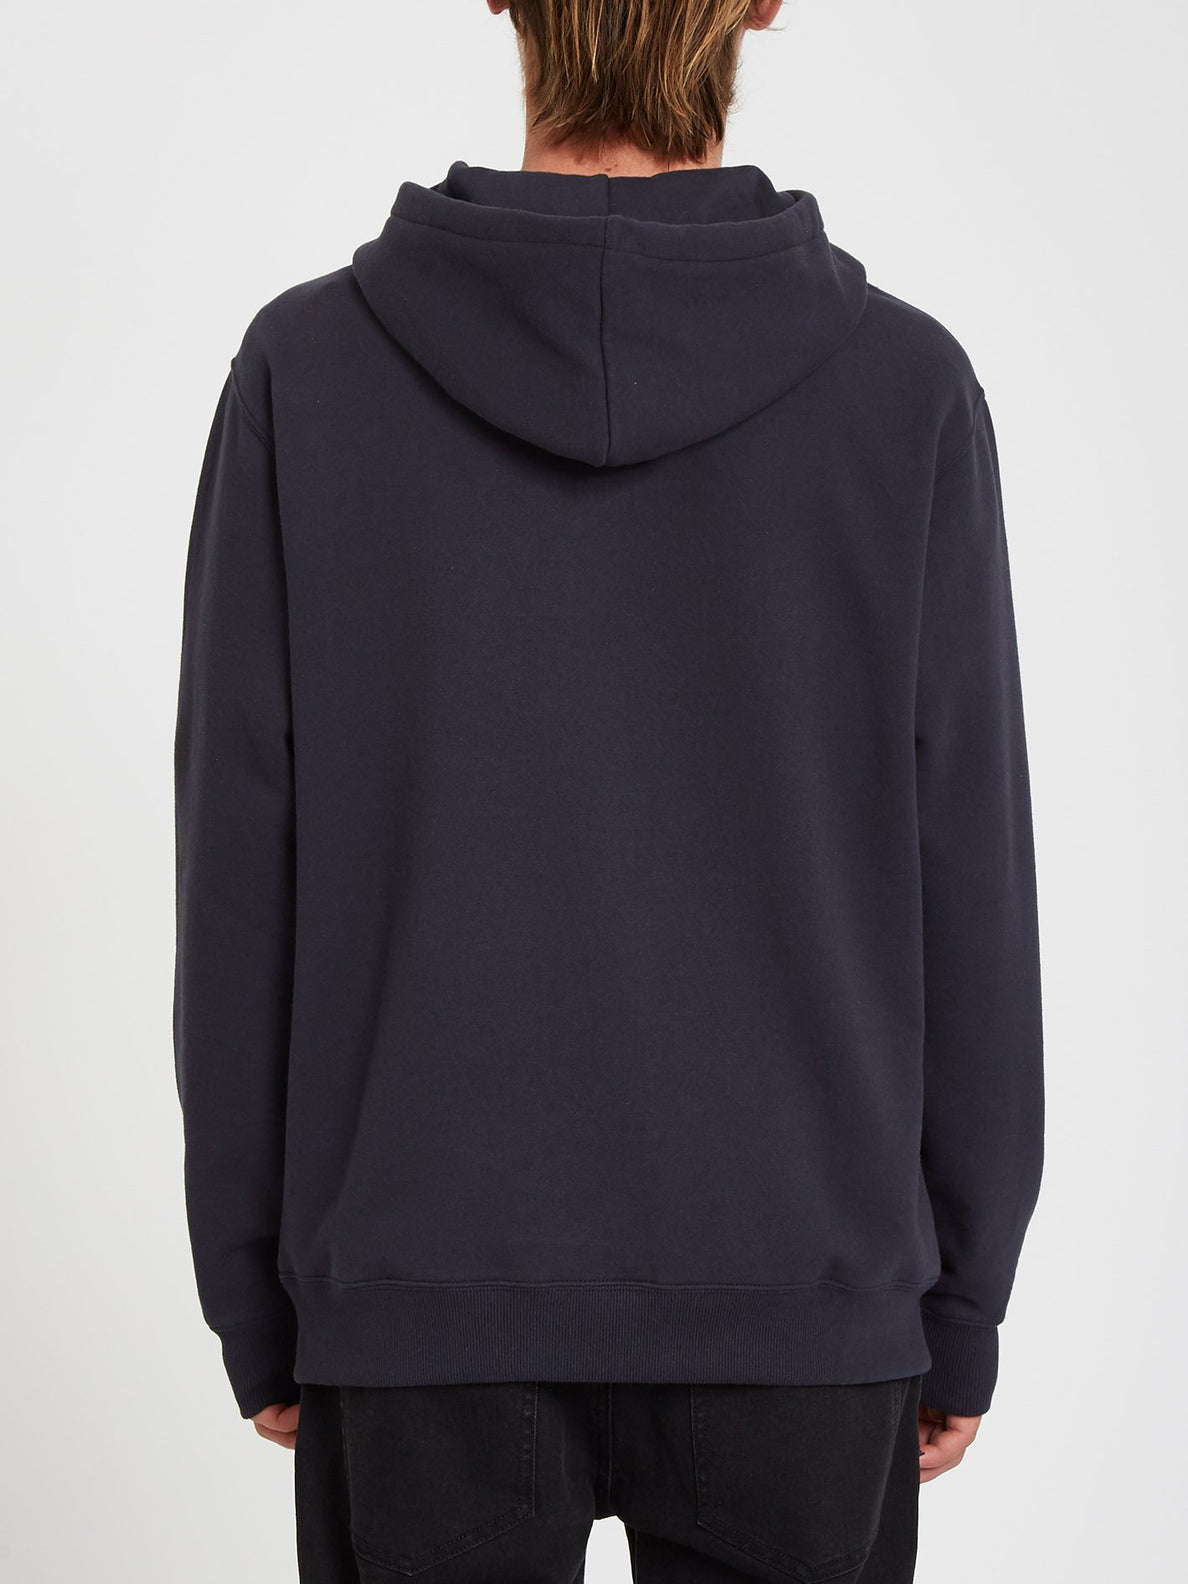 Iconic Stone Hoodie - NAVY (A4132103_NVY) [B]